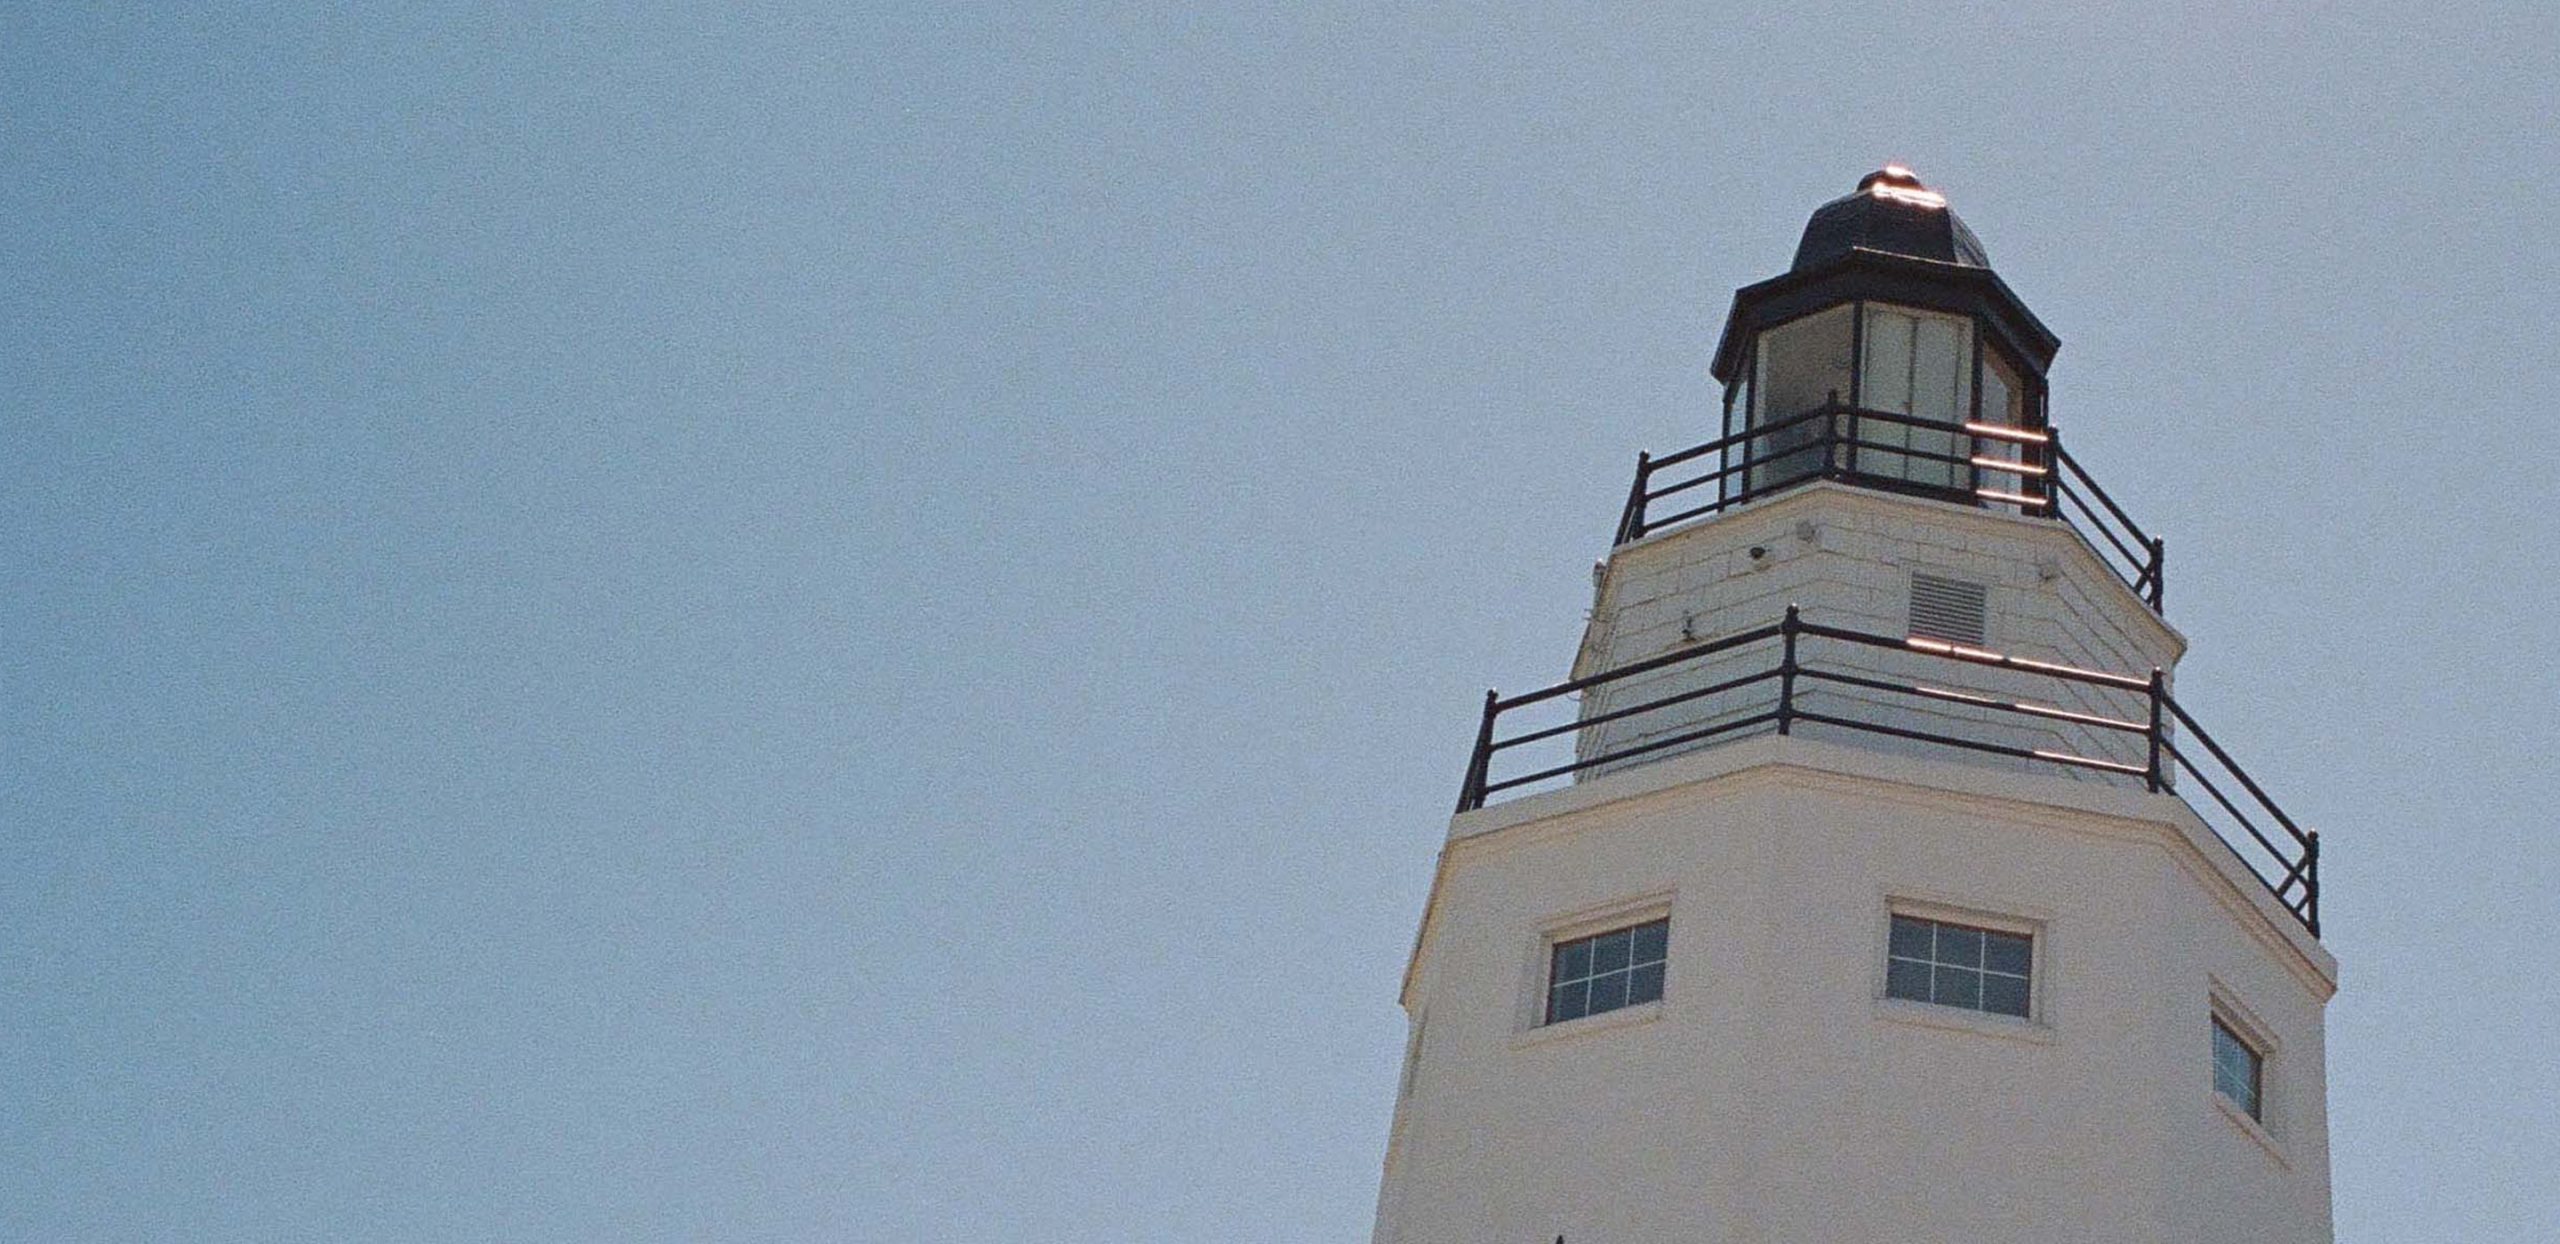 The top of a lighthouse shines brightly under the rays of the sun.